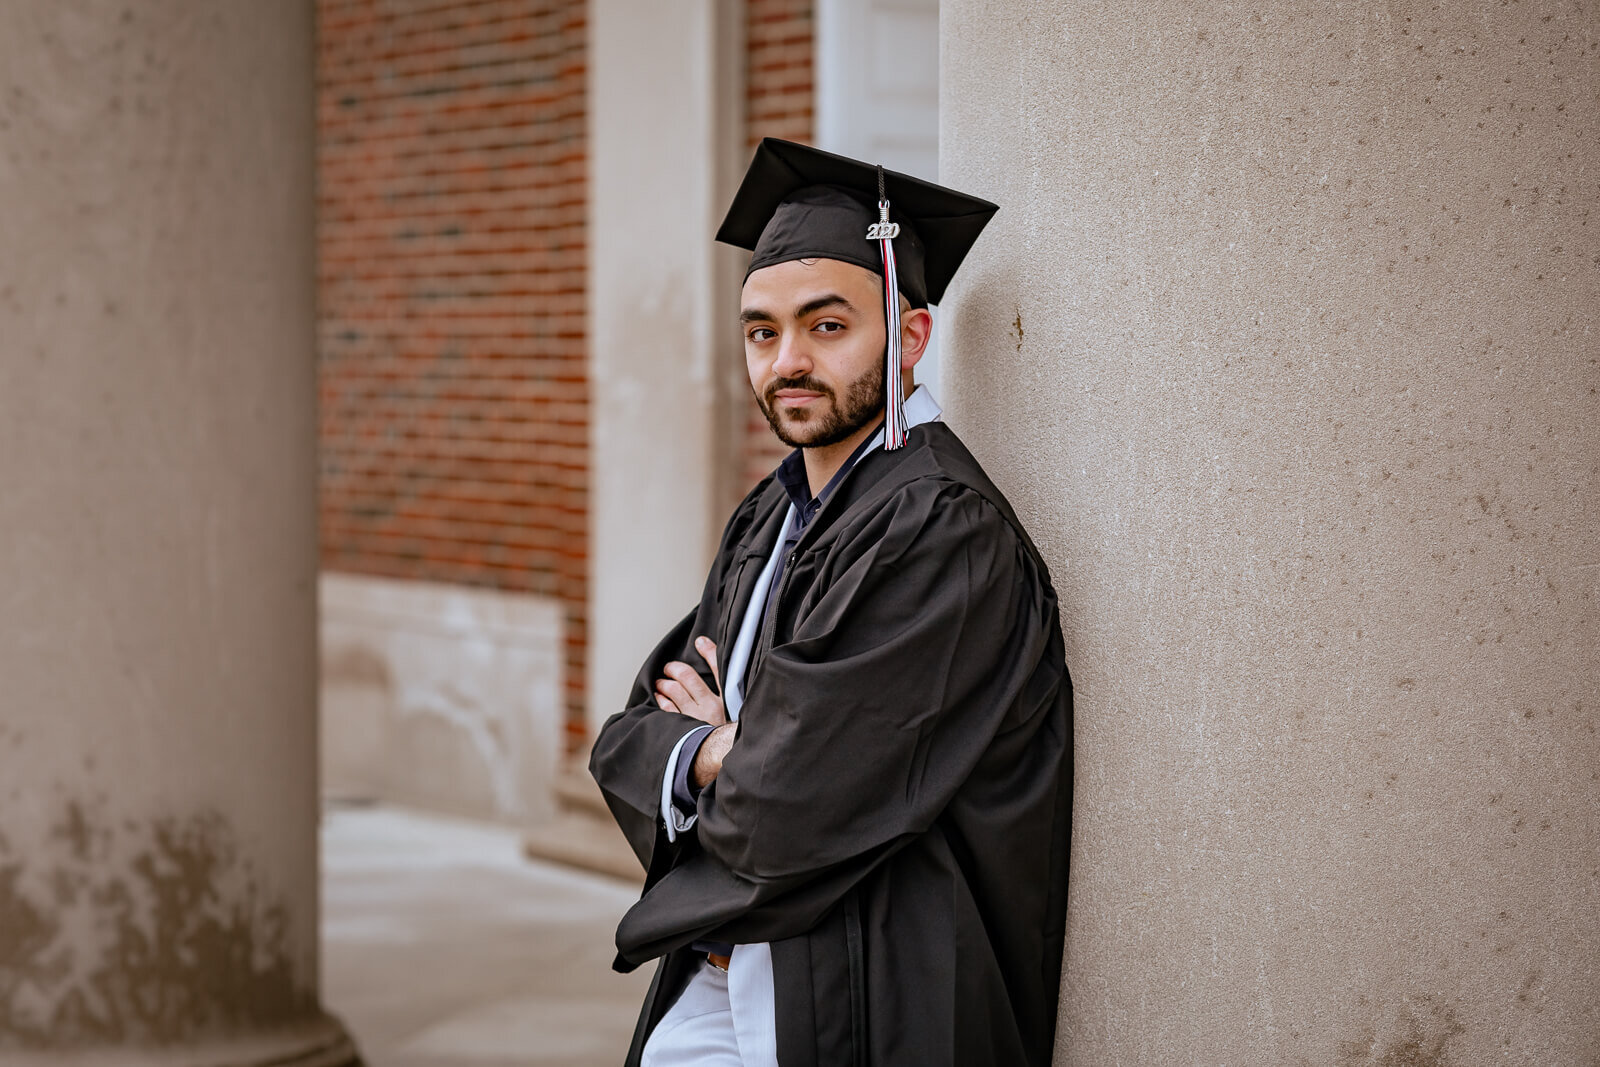 graduation-pictures-uc-college-business.jpg